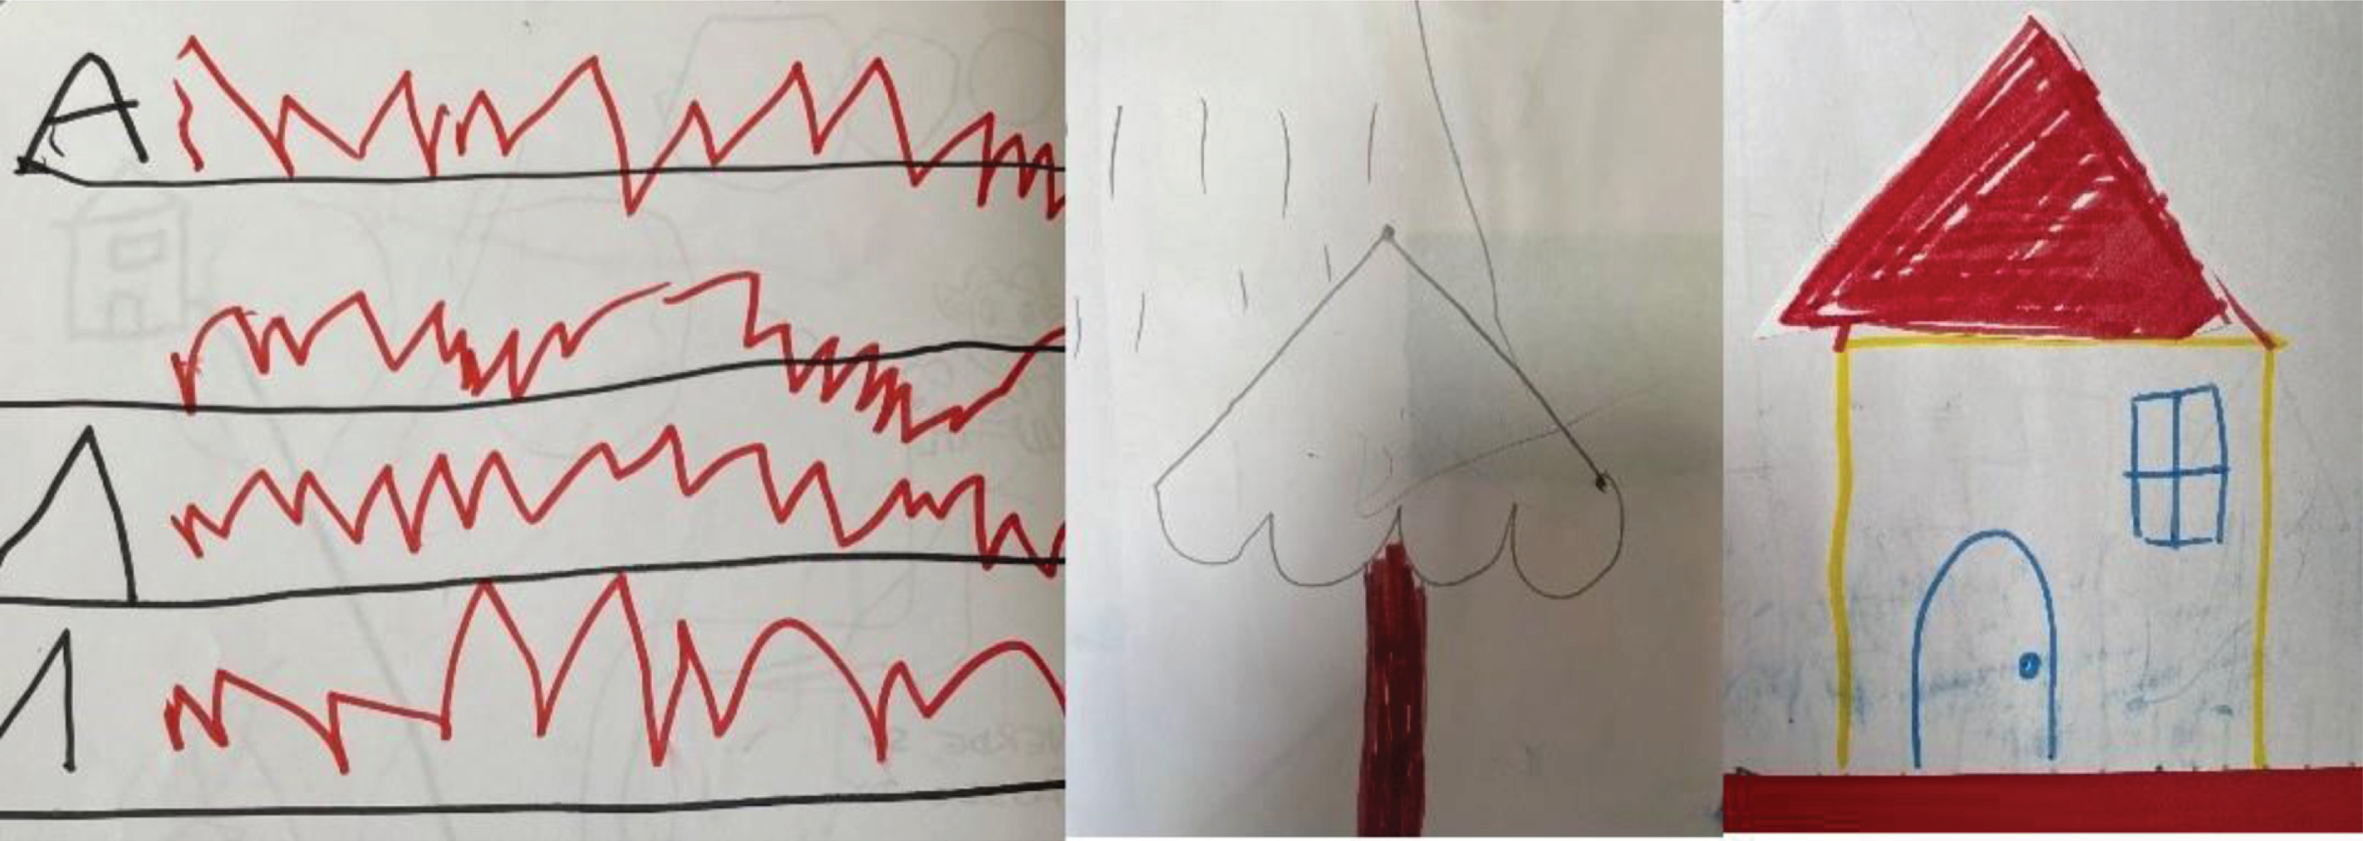 Facilitation for learning to write the letter “A”. The child was asked to follow a sinusoidal track, staying within the path (black lines) without touching the two edges (left). Since she had difficulty recognizing and learning abstract shapes (letters or geometric figures), stereognosis recognition of shapes was employed, using tangible forms, such as the tree crown (middle) or the roof of a house (right).